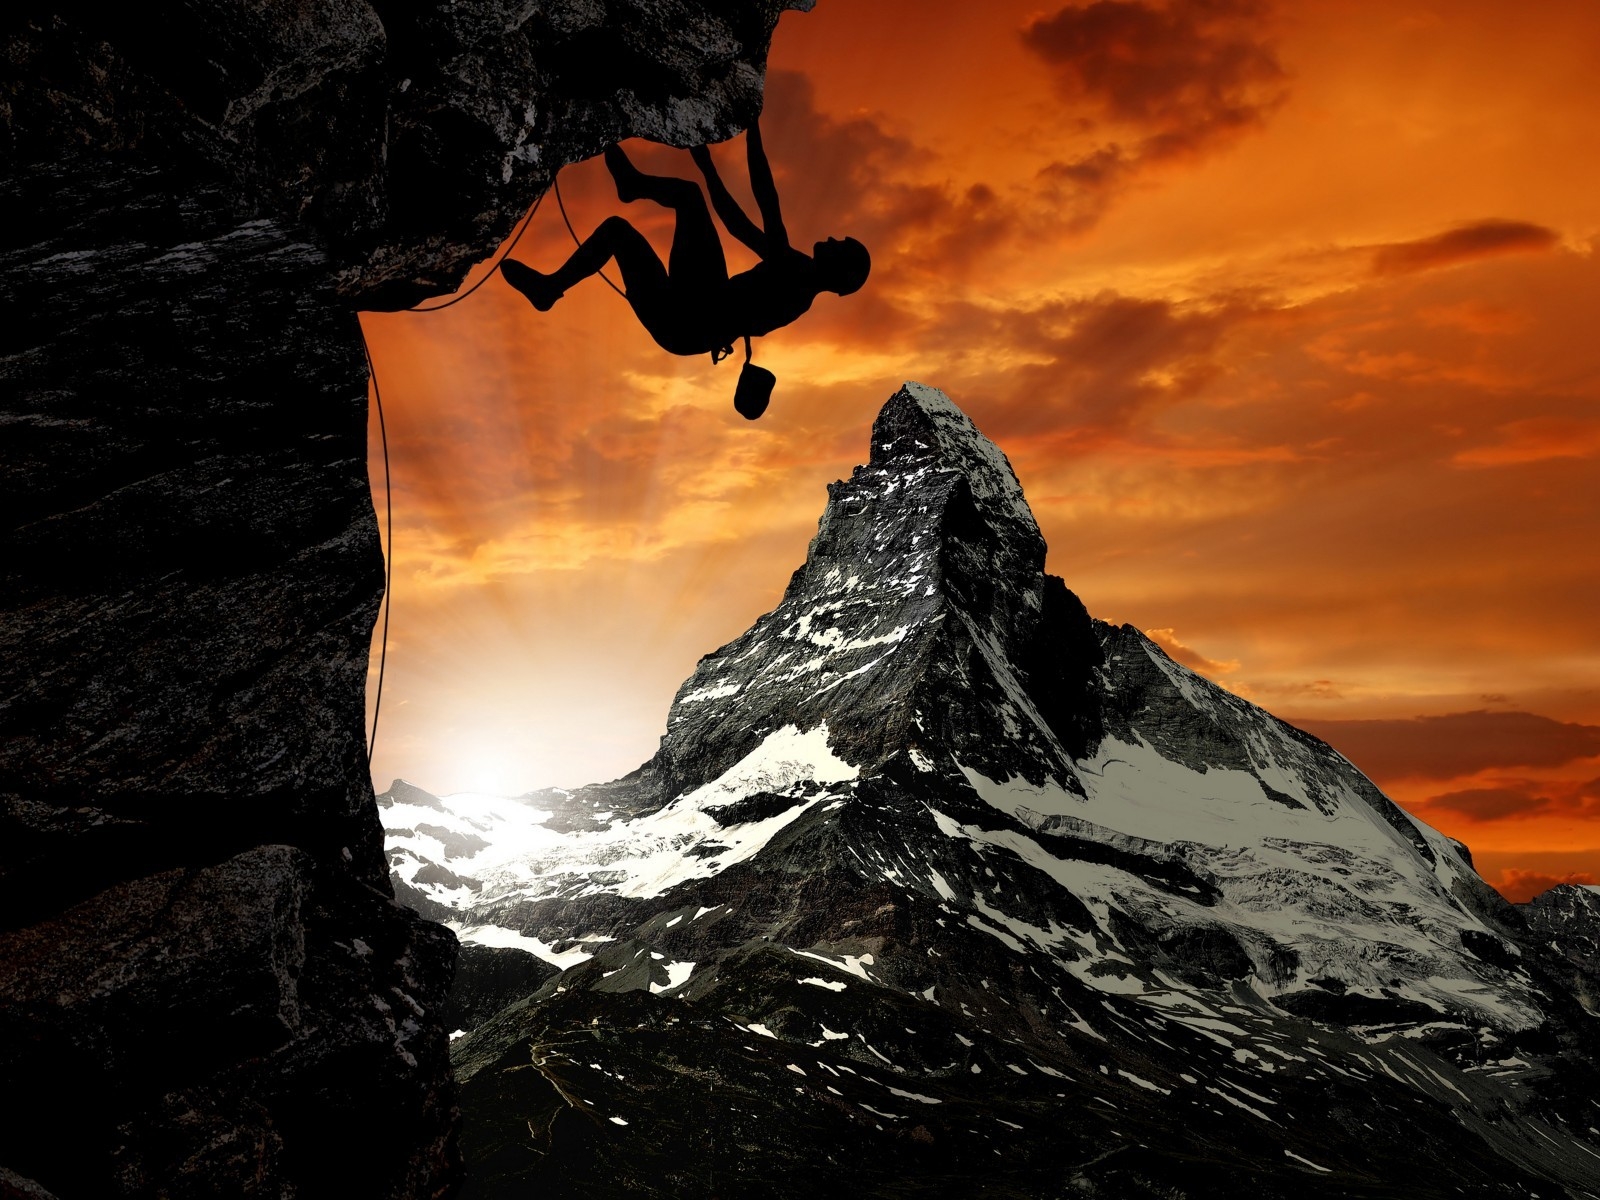 Mountain Climber for 1600 x 1200 resolution